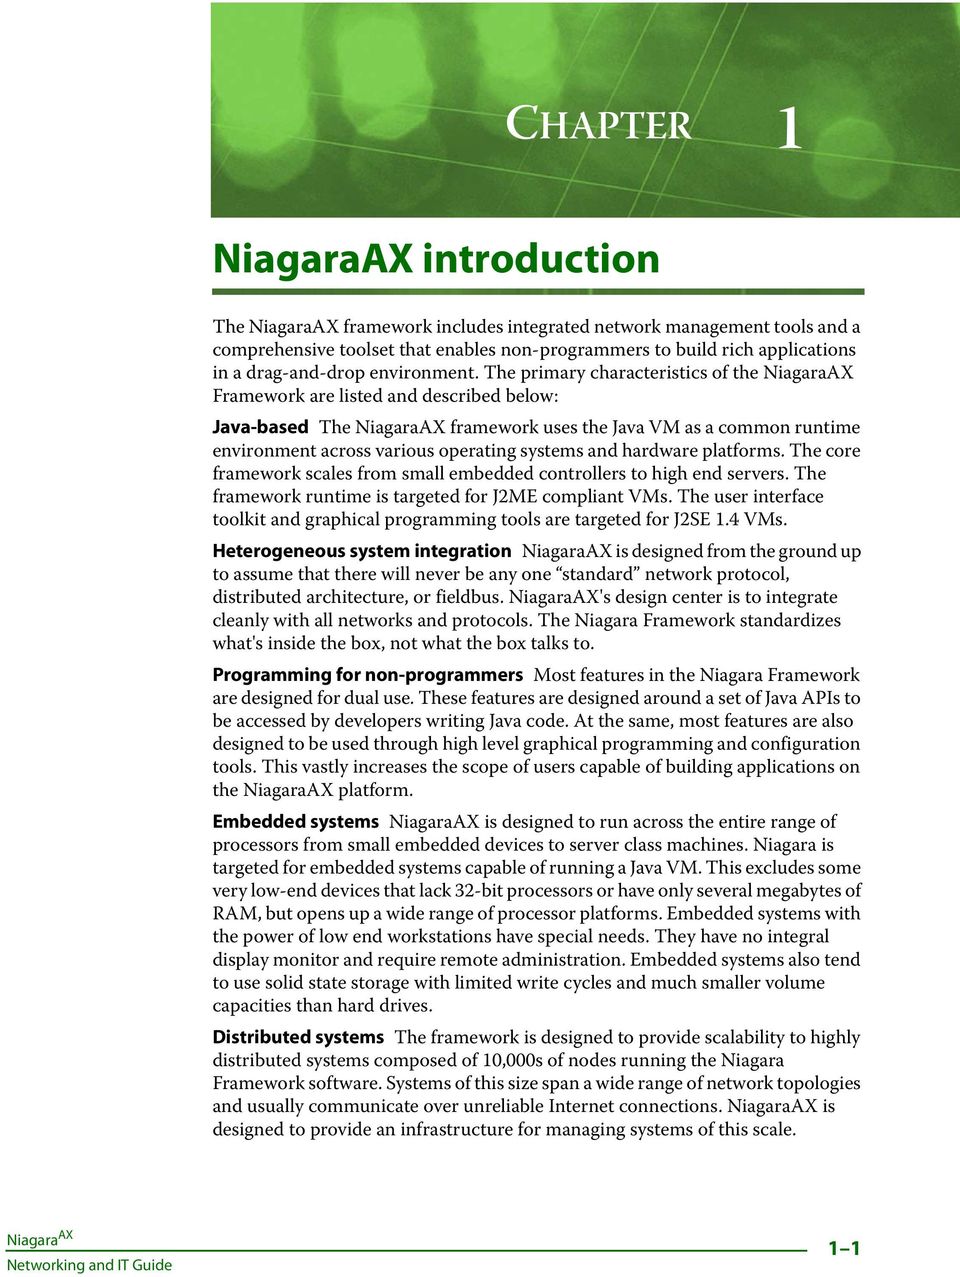 The primary characteristics of the NiagaraAX Framework are listed and described below: Java-based The NiagaraAX framework uses the Java VM as a common runtime environment across various operating